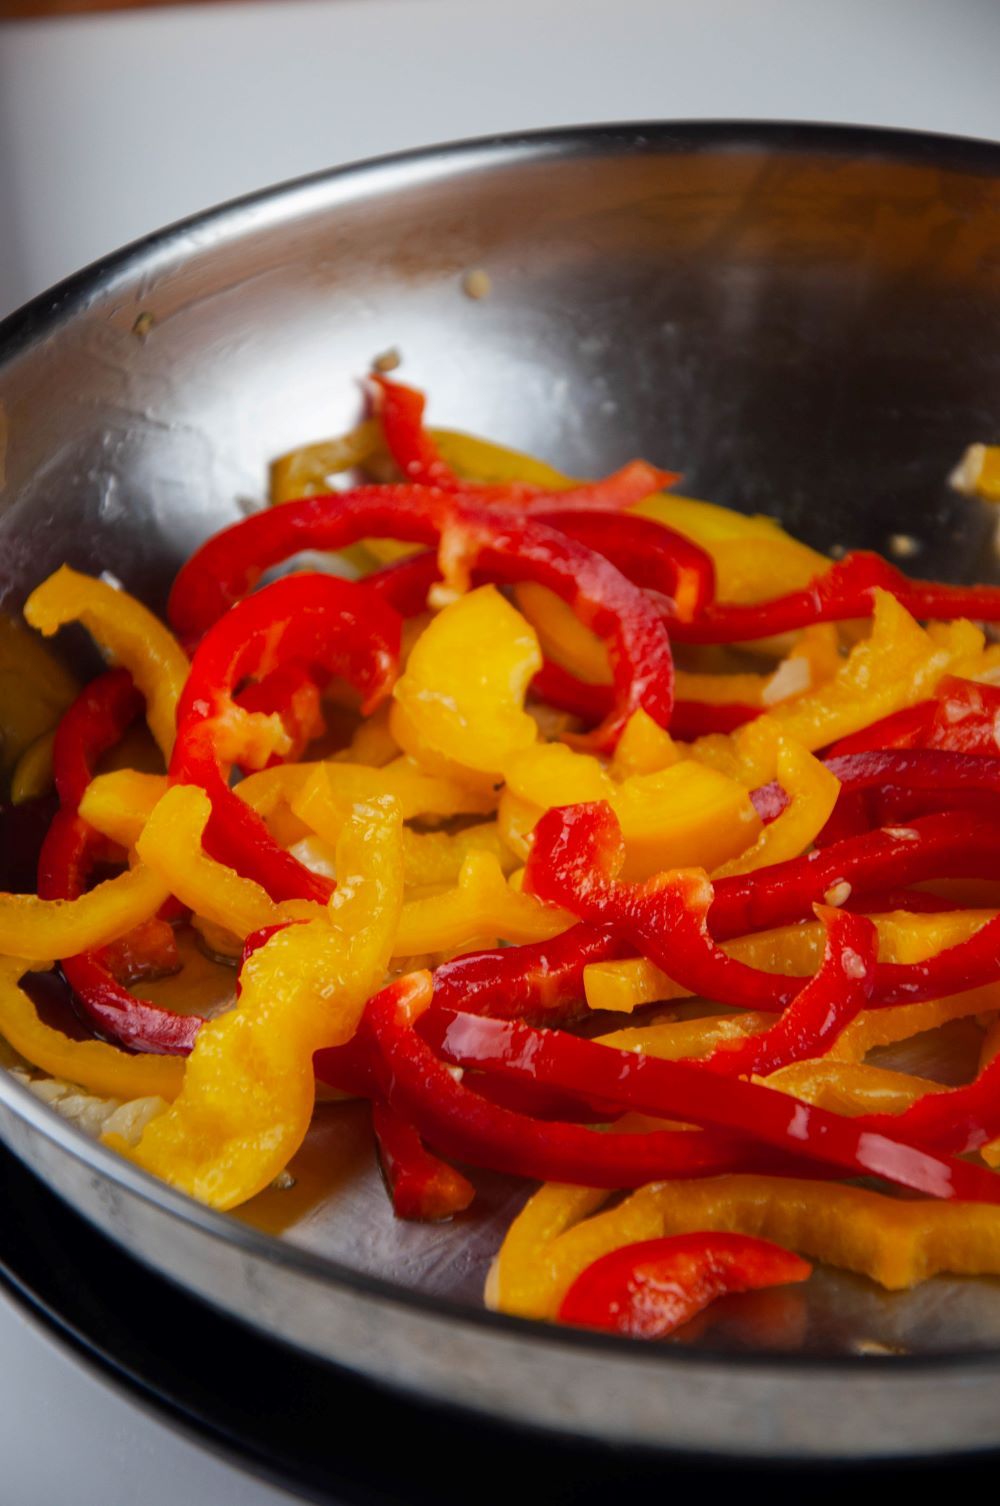 Stir-frying the bell peppers